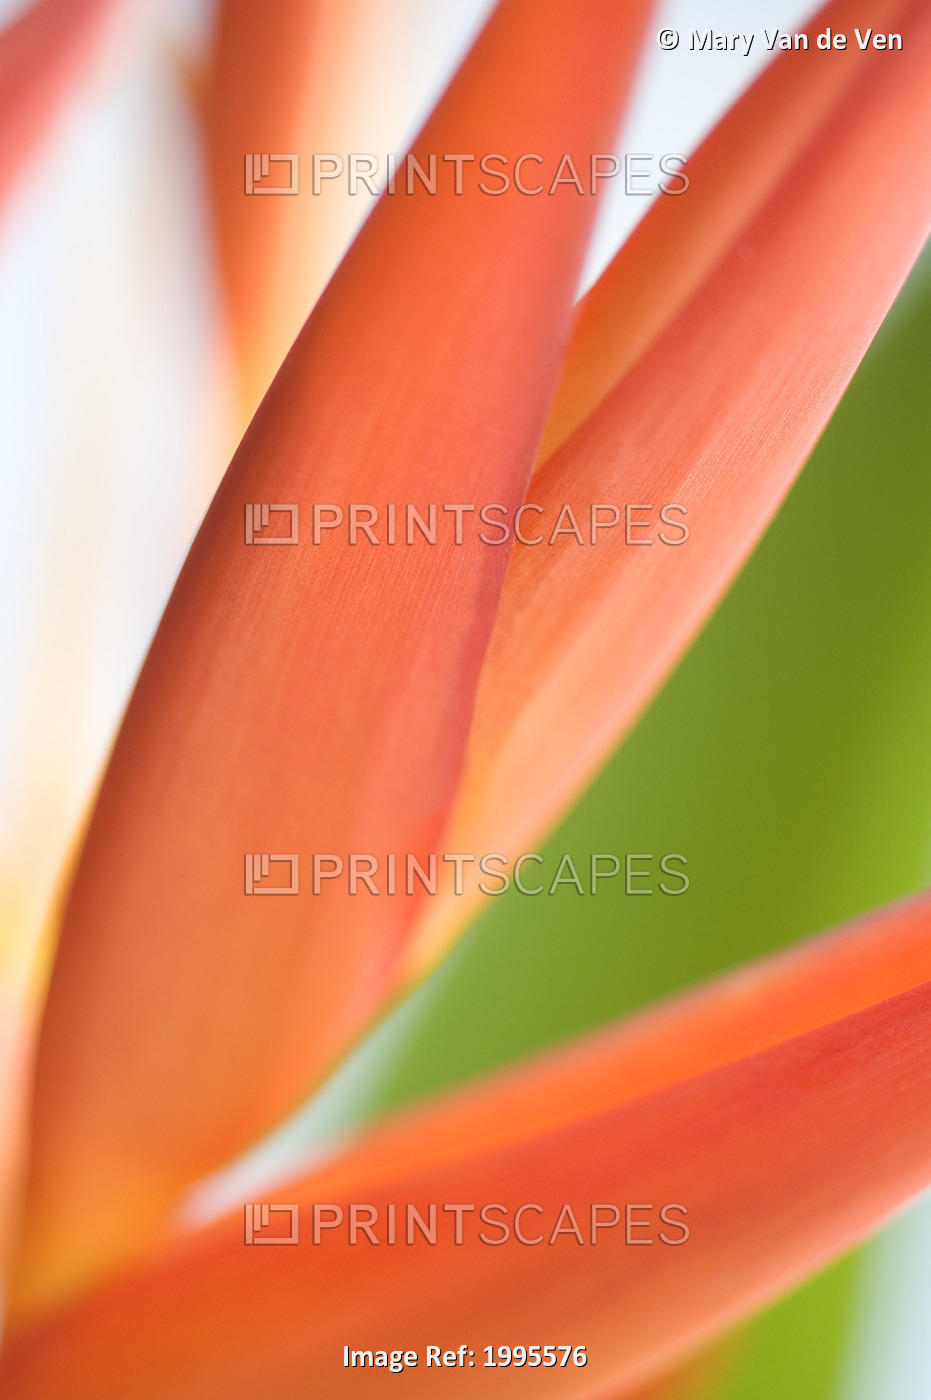 Absttract Close-Up View Of Heliconia